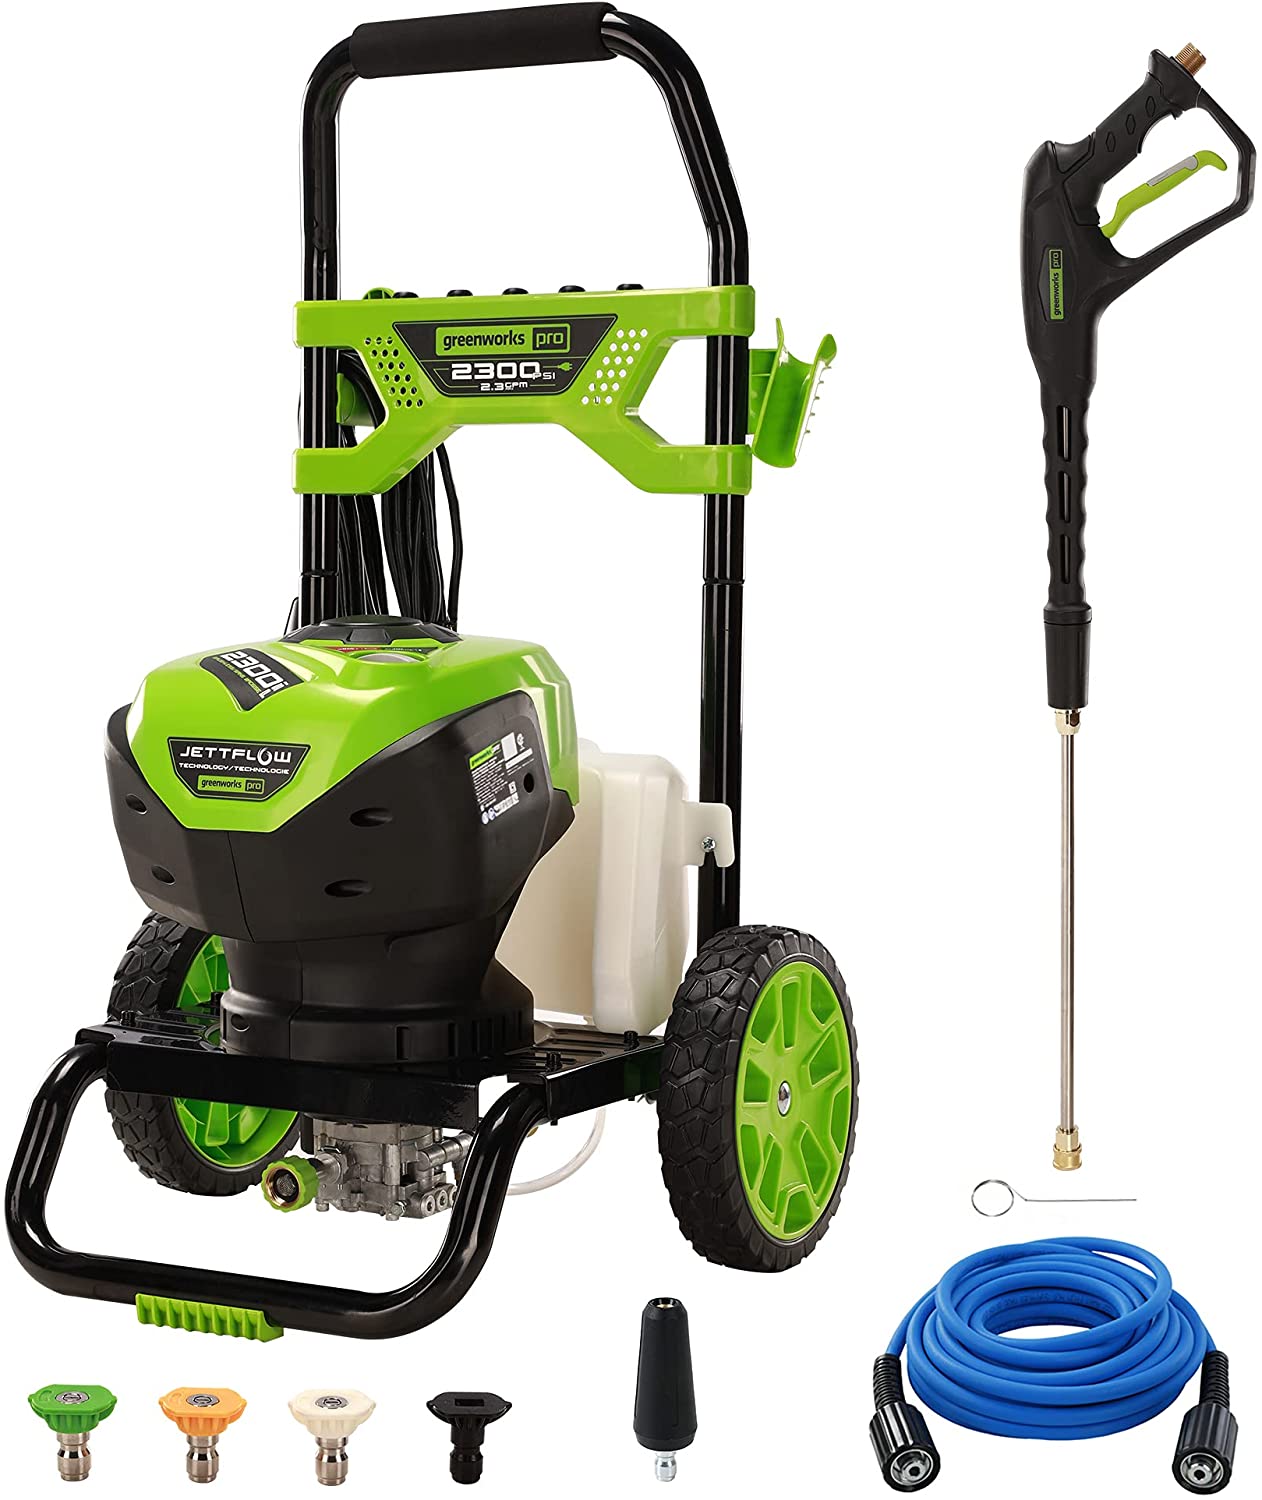 Greenworks Pro Electric Pressure Washer Early Black Friday Deal!